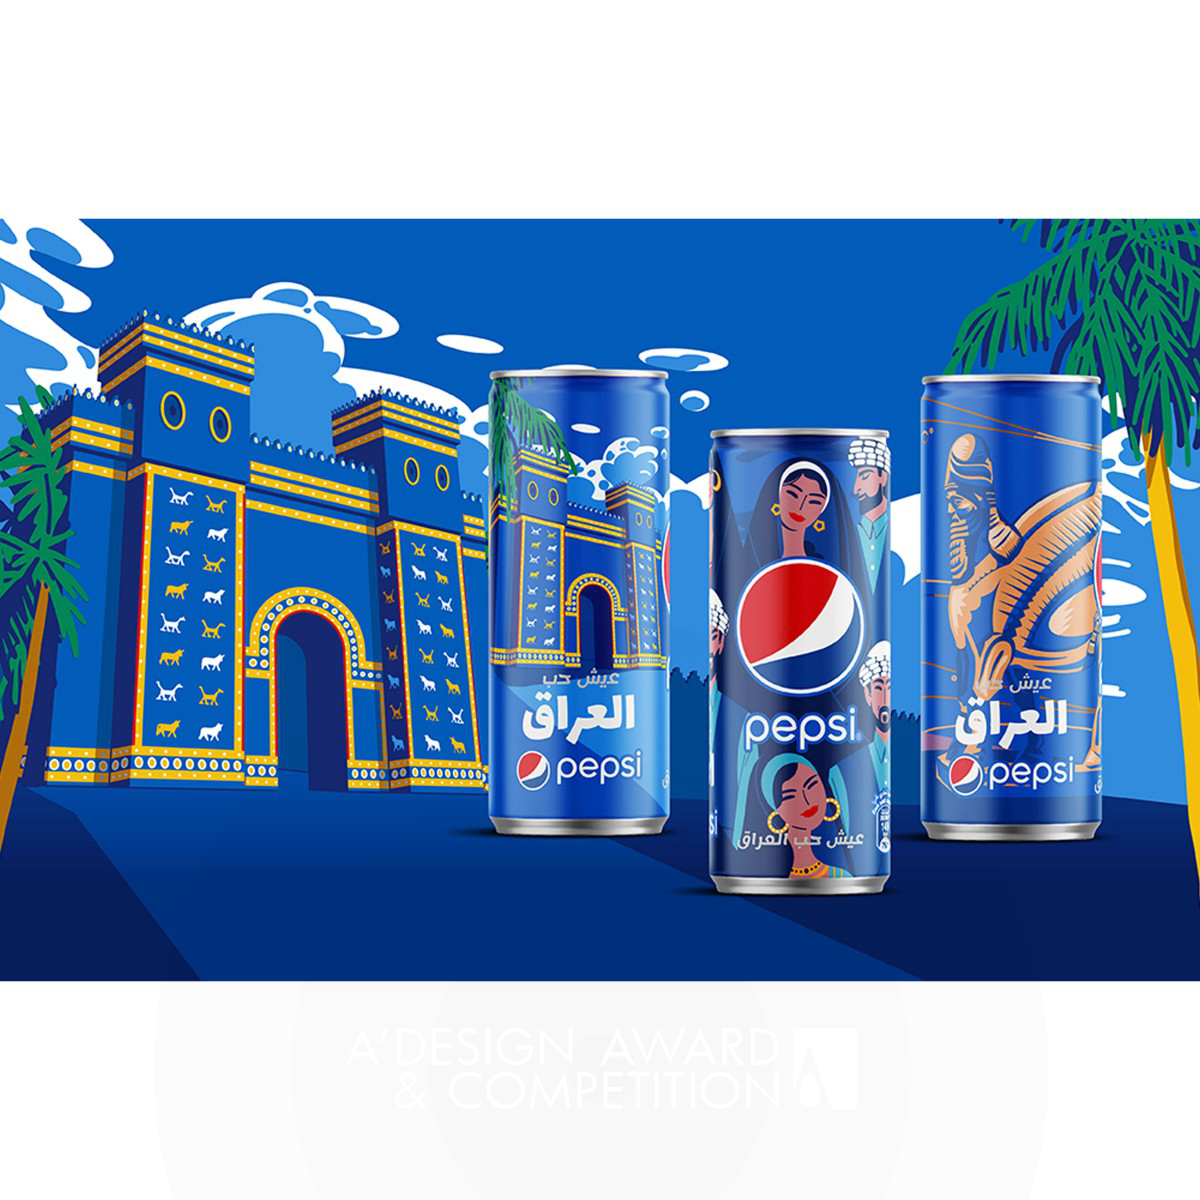 Pepsi Culture Can Series Beverage by PepsiCo Design & Innovation